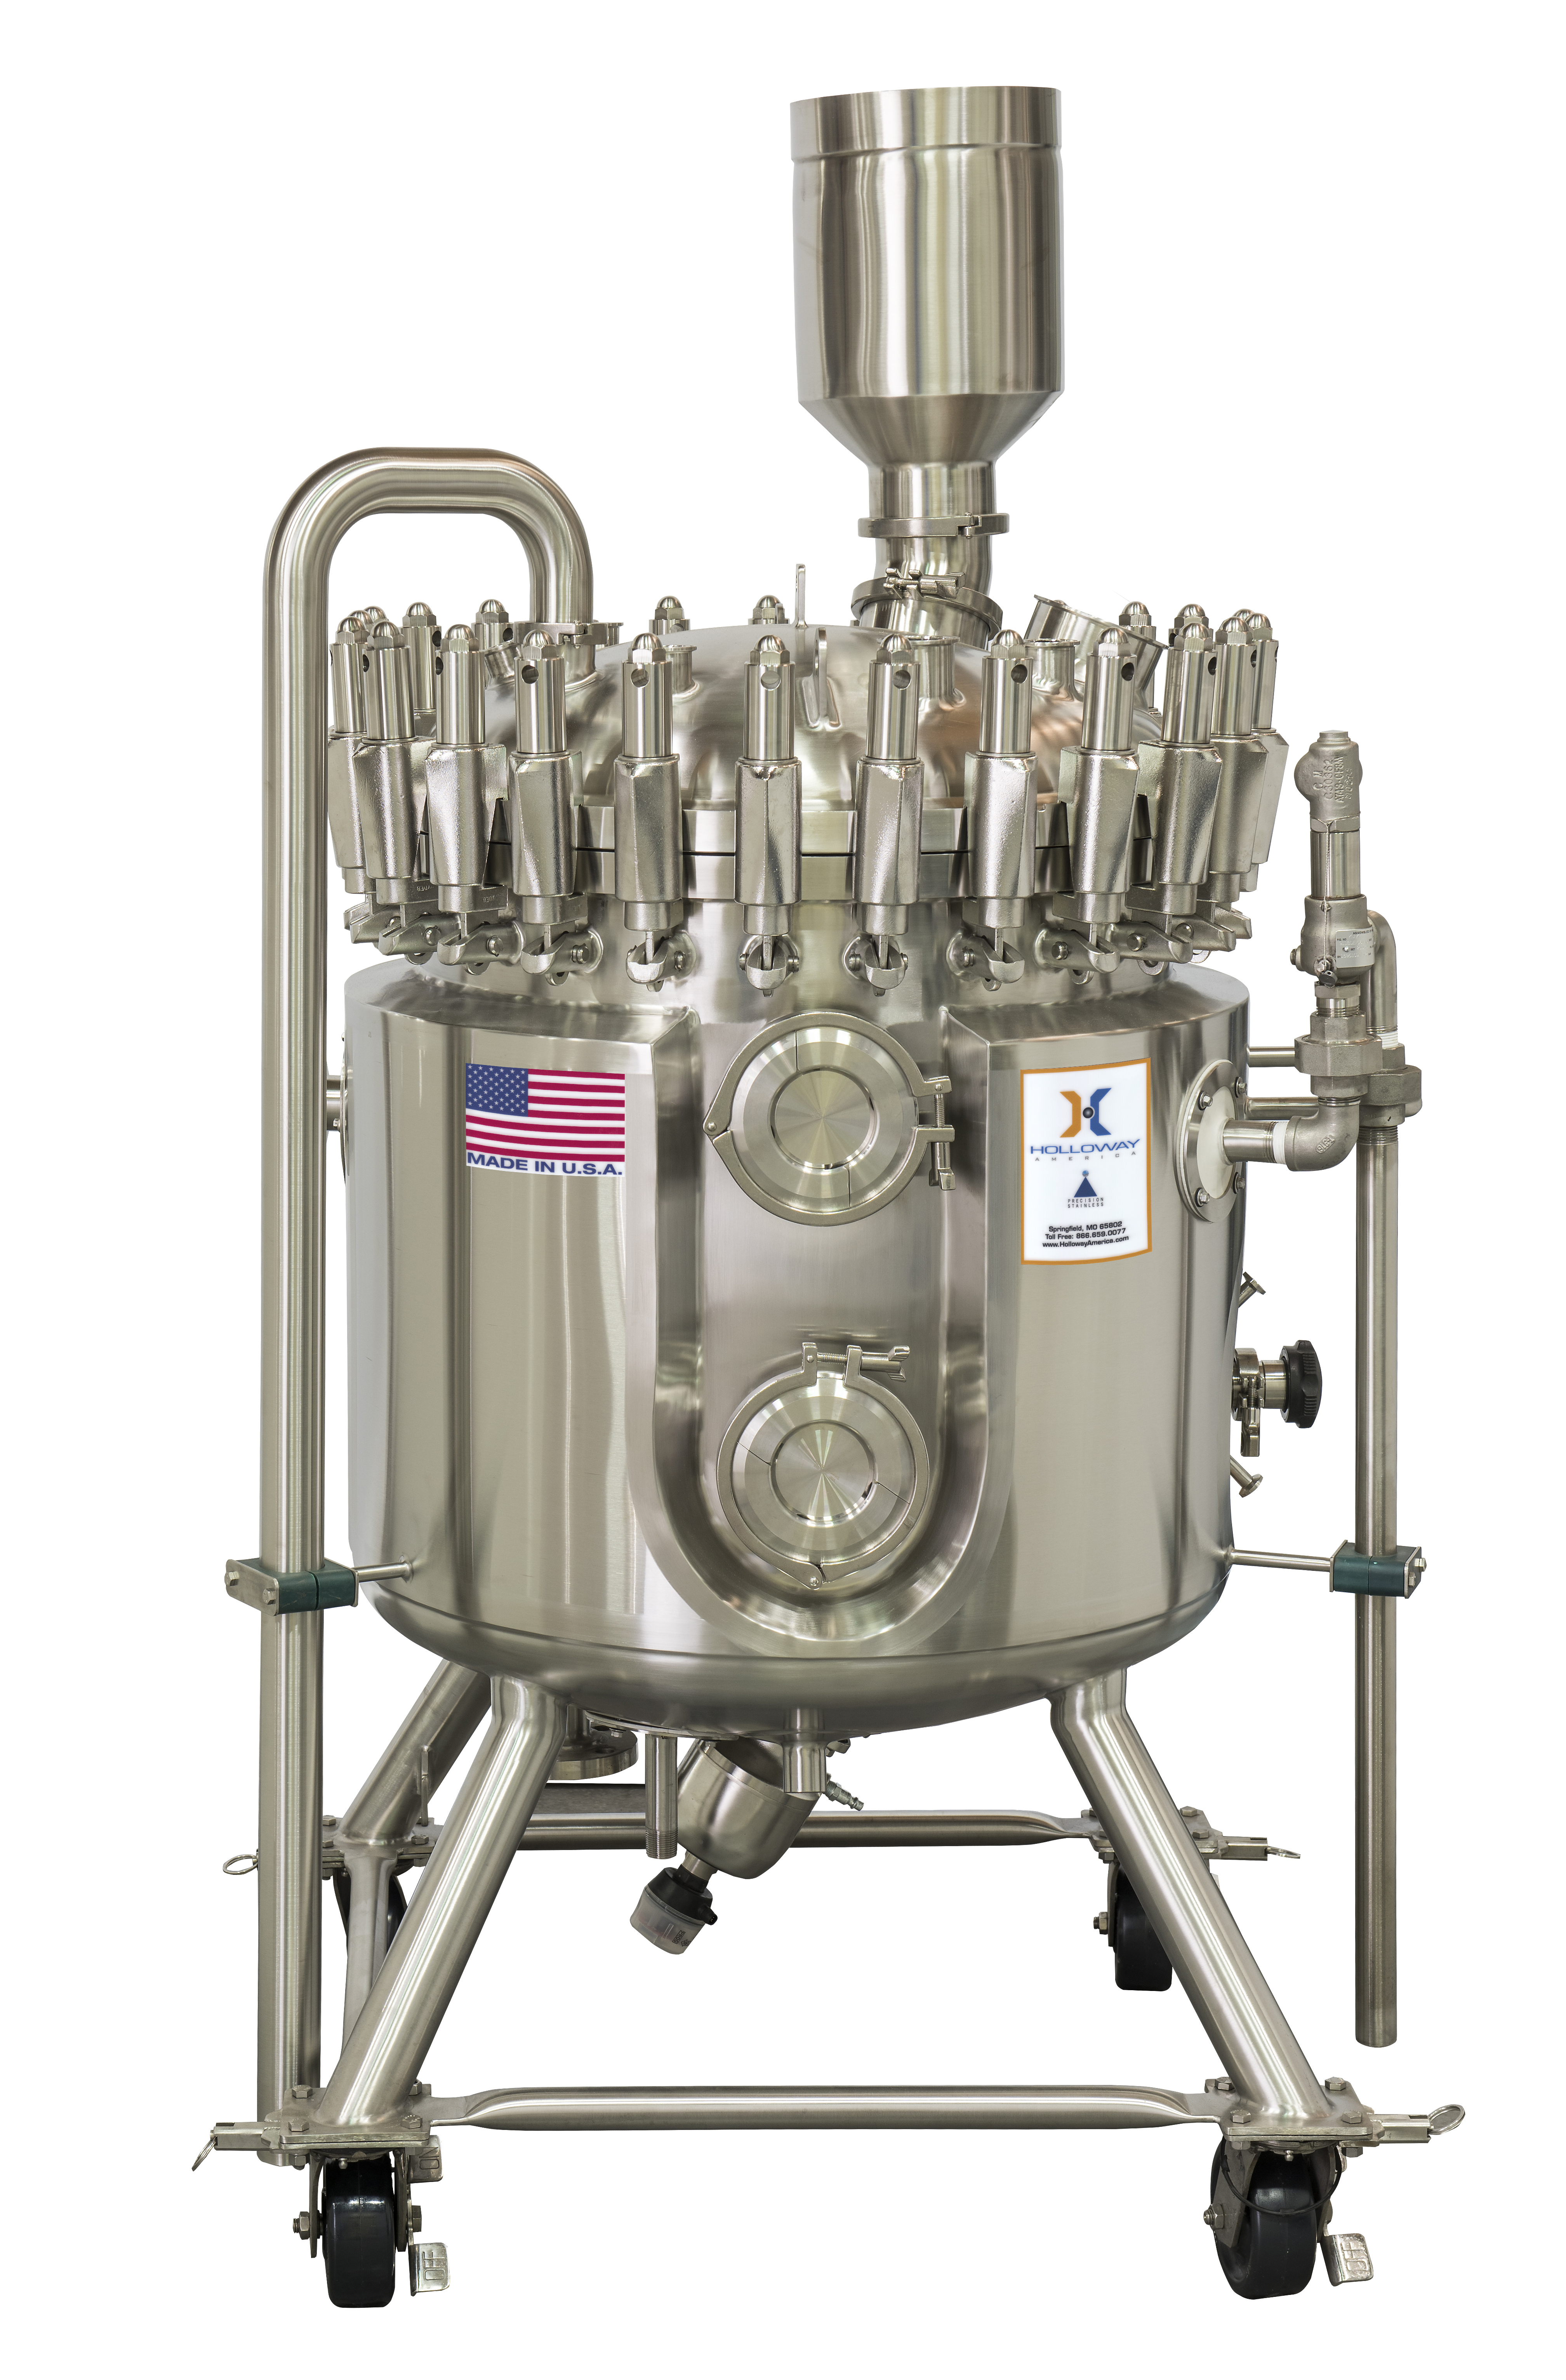 Holloway builds portable pressure vessels like this vertical vessel for the laboratory.